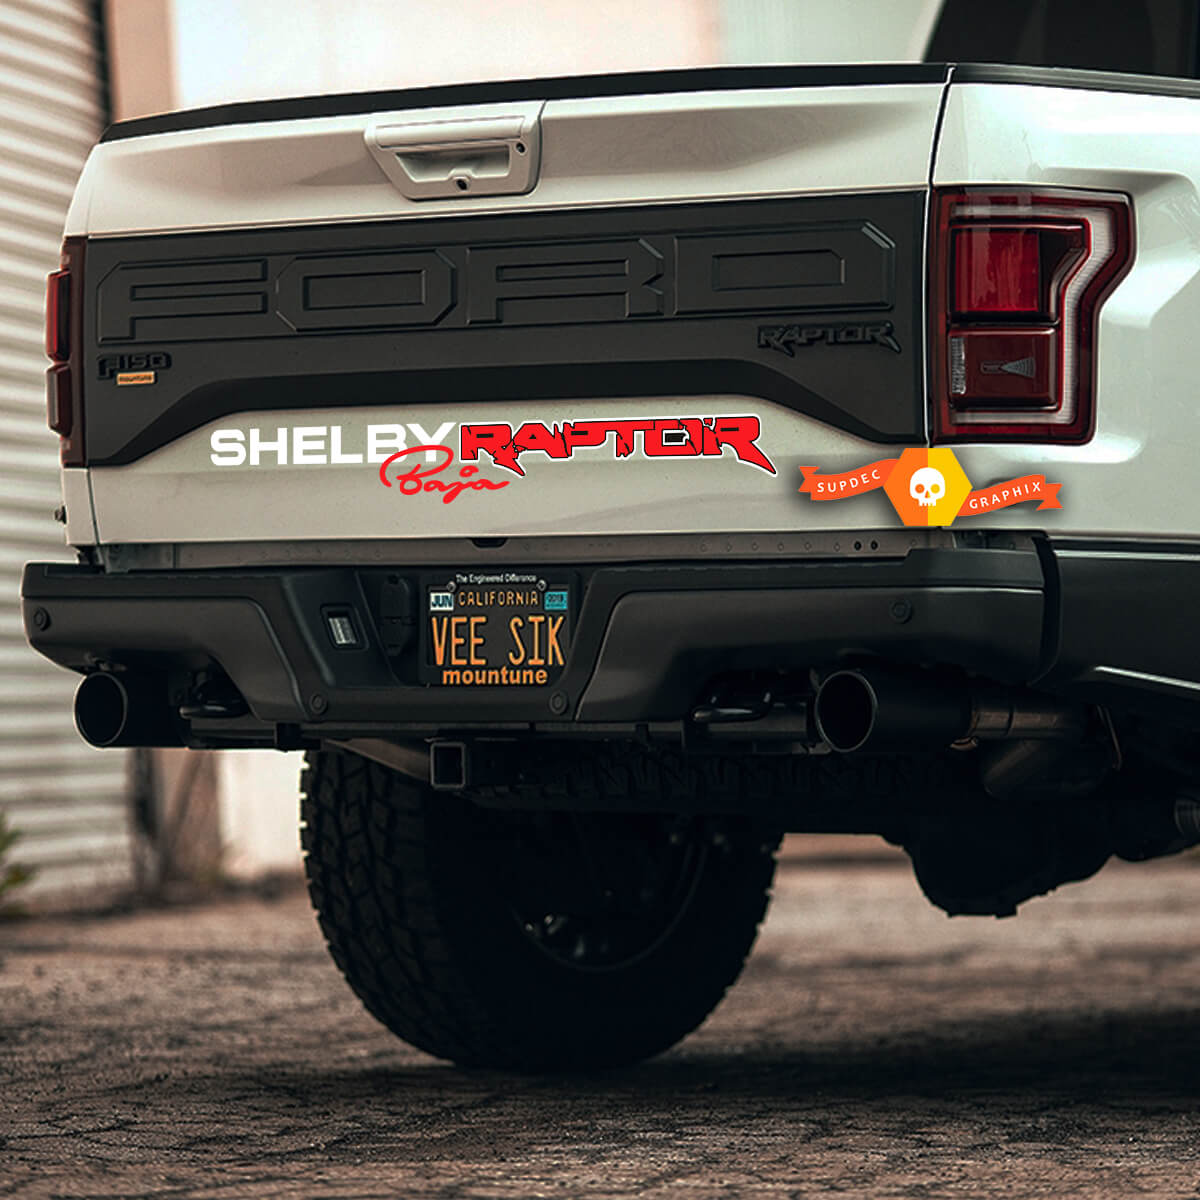 Ford F-150 Raptor Shelby Baja Edition logo side bed graphics decal sticker